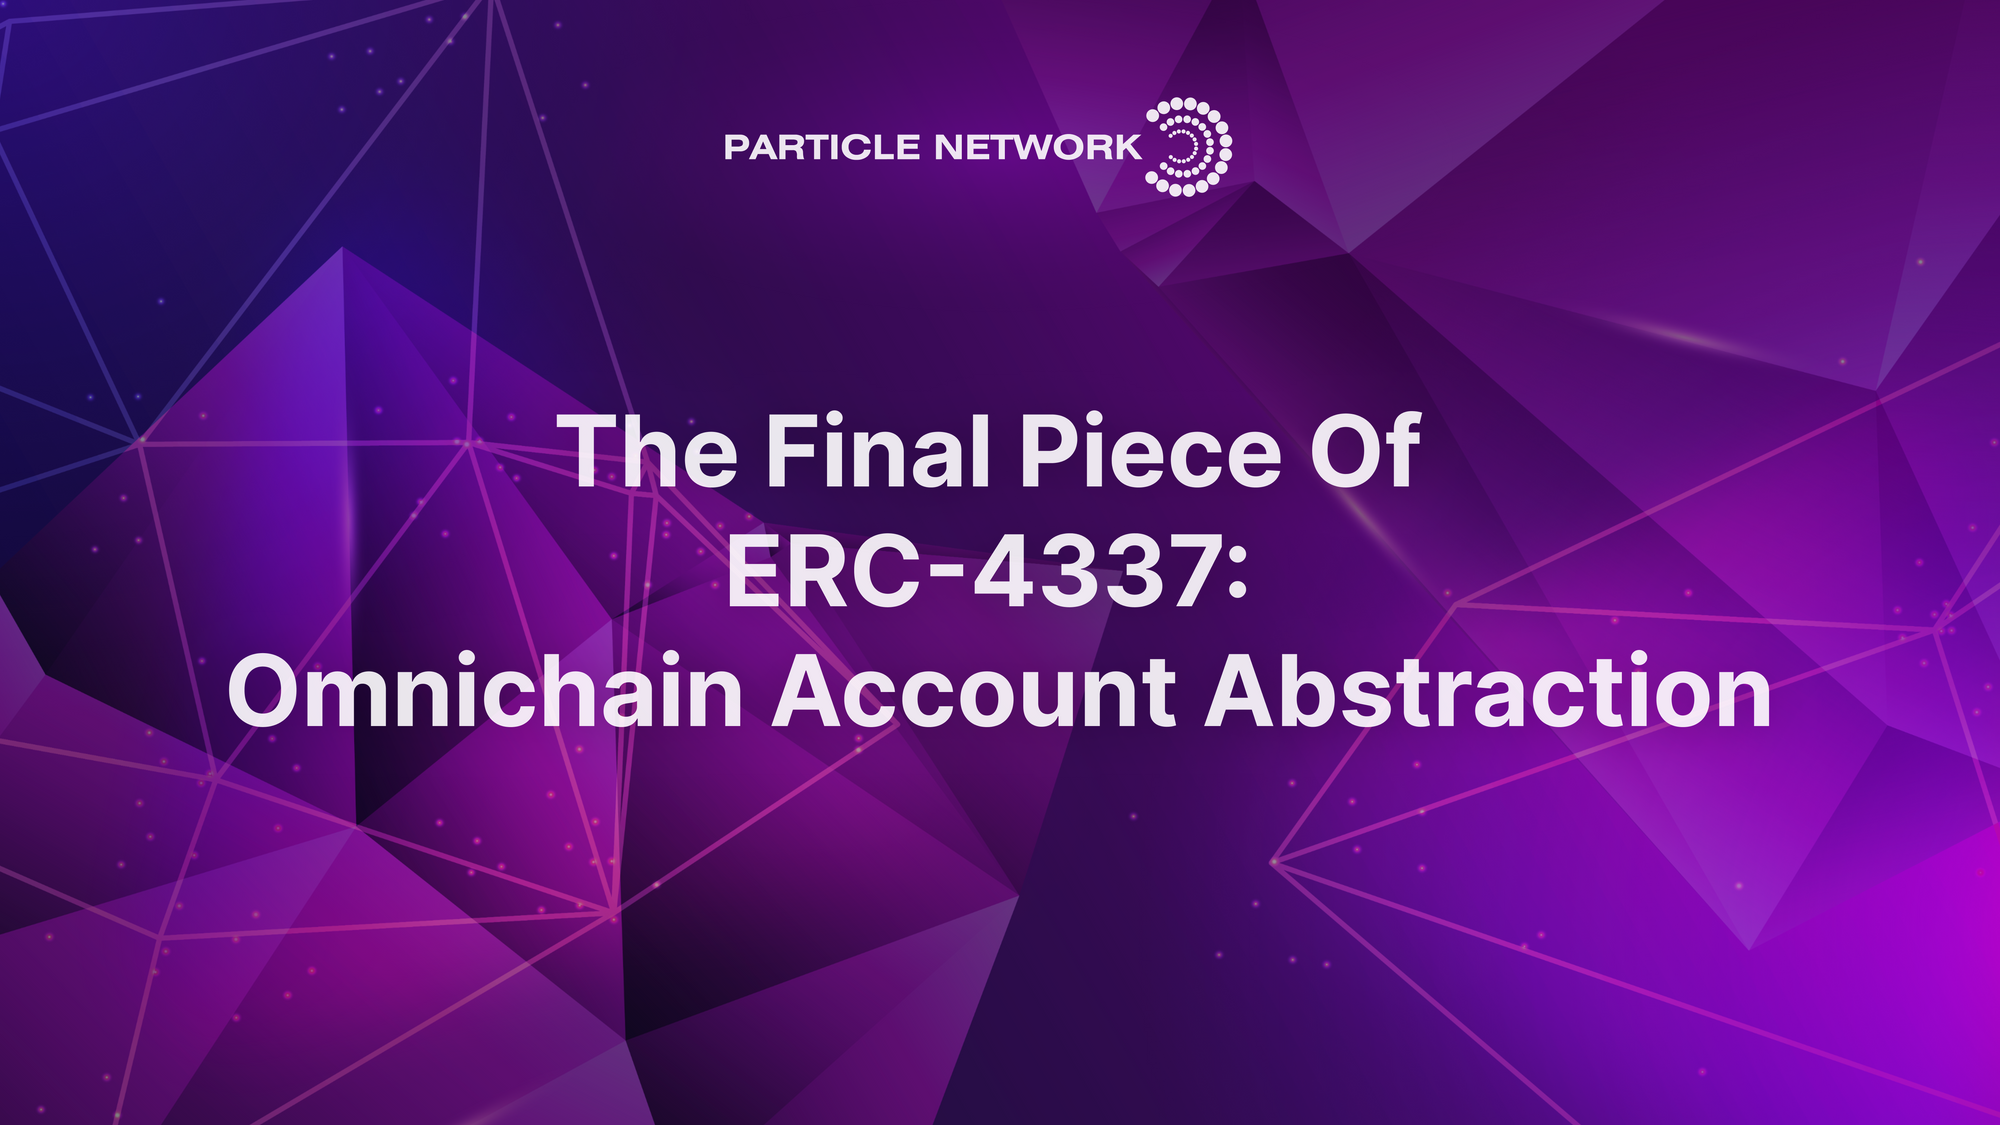 The Final Piece of ERC-4337: Omnichain Account Abstraction